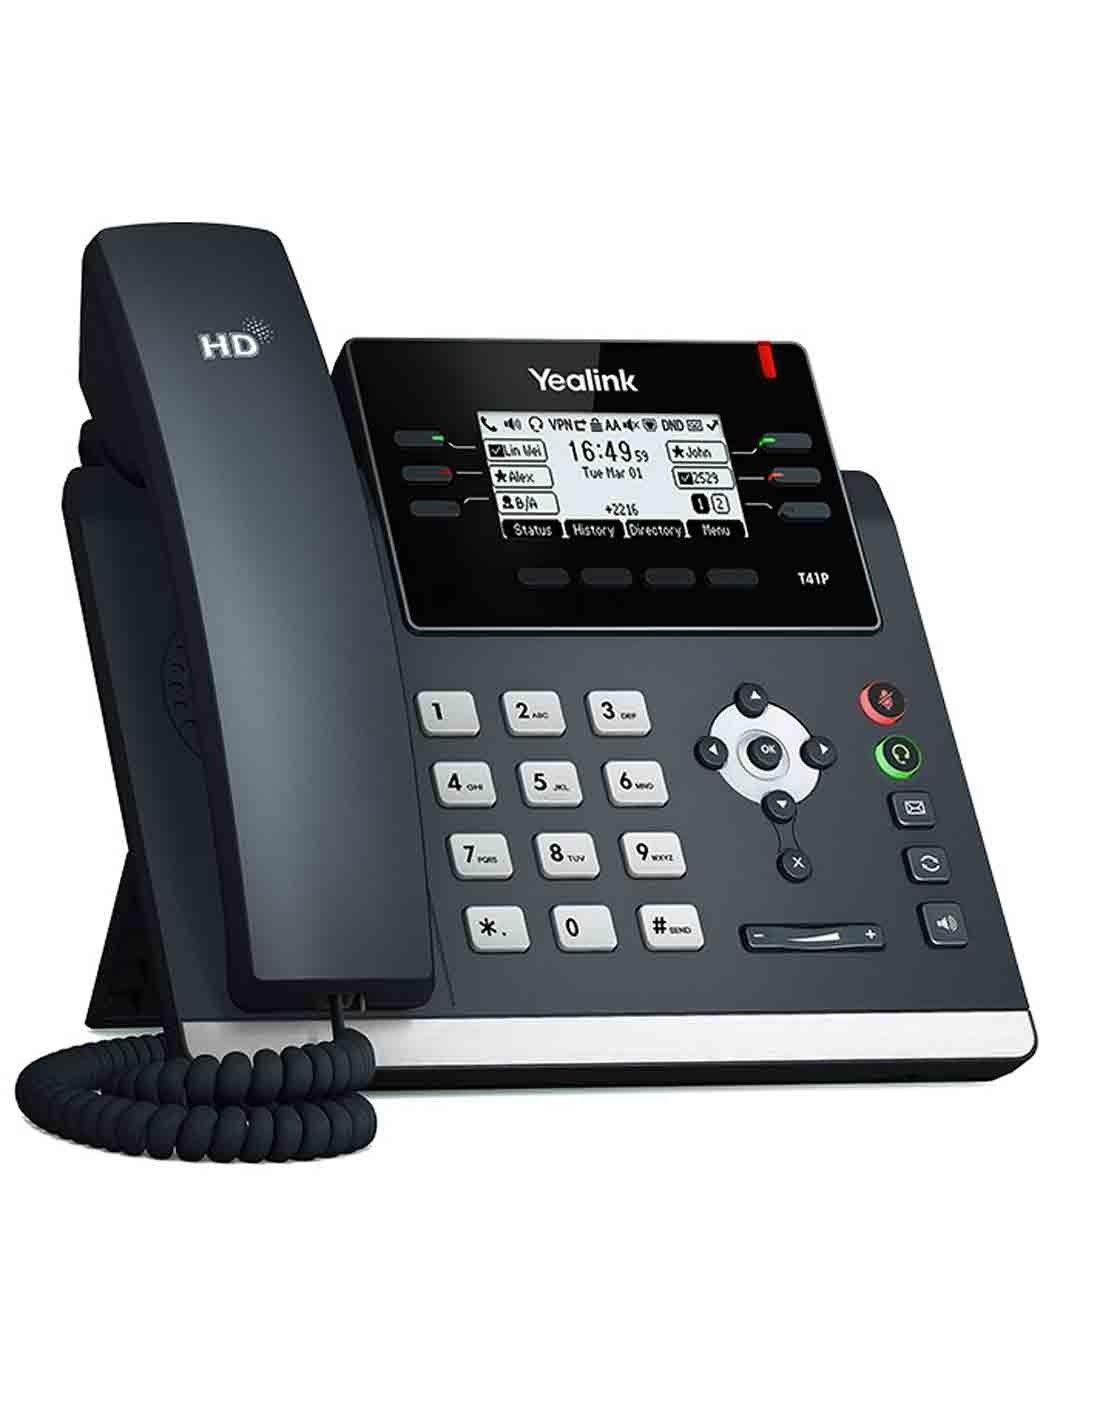 Yealink SIP-T41P Ultra-elegant IP Phone at a Cheap Price in Dubai Online Store